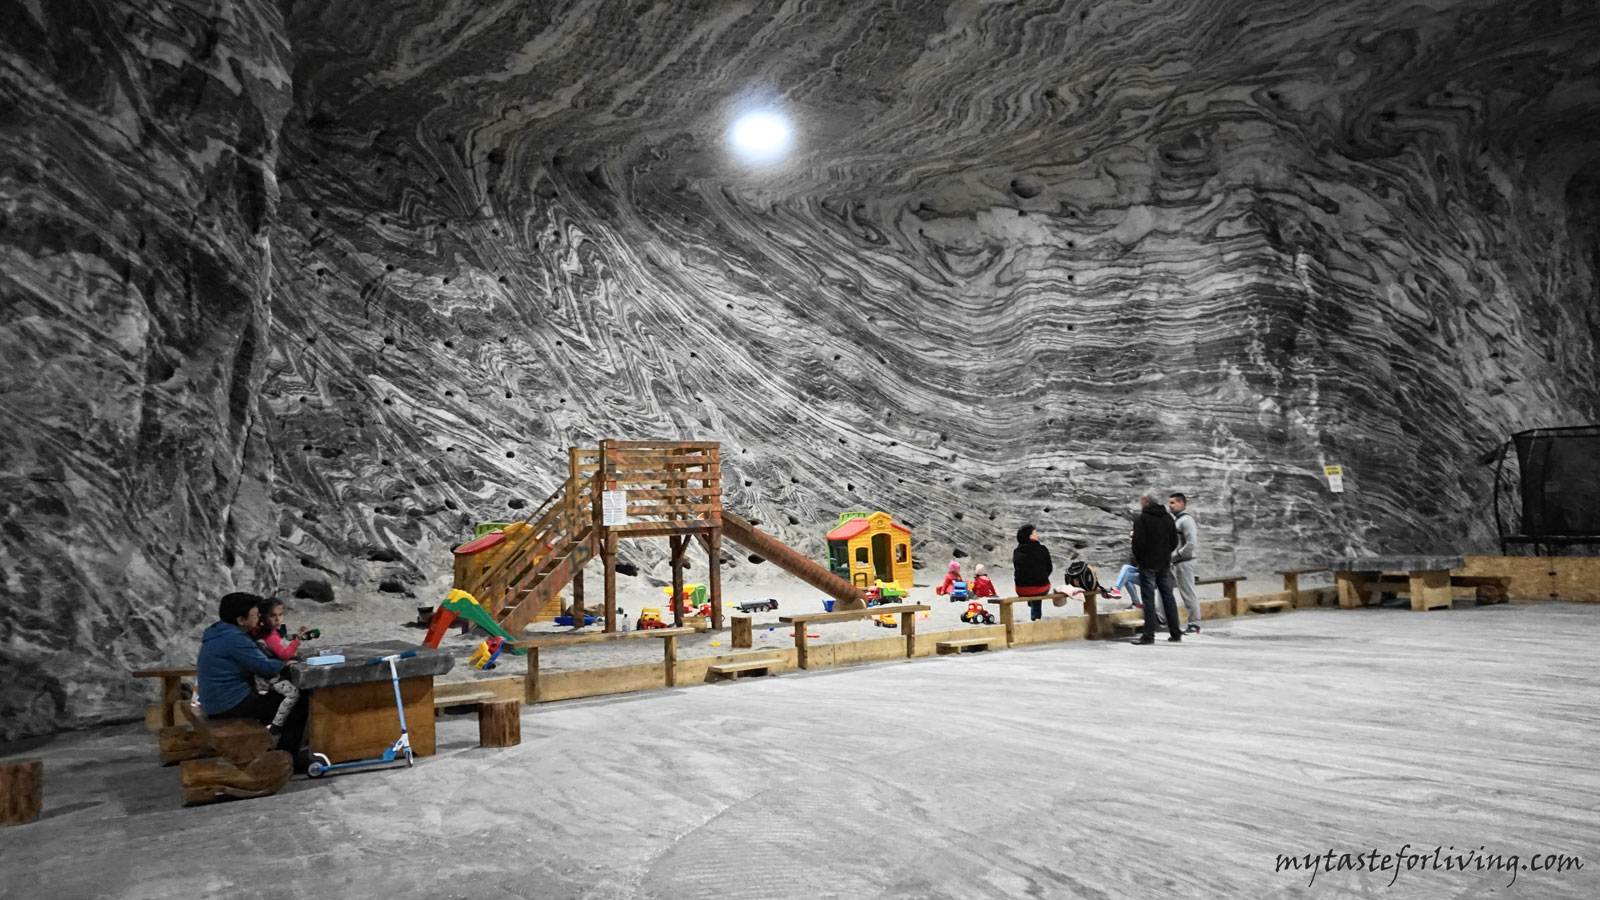 Ocnele Mari is a former salt mine, located in Romania, currently open to visitors and made as a gallery.